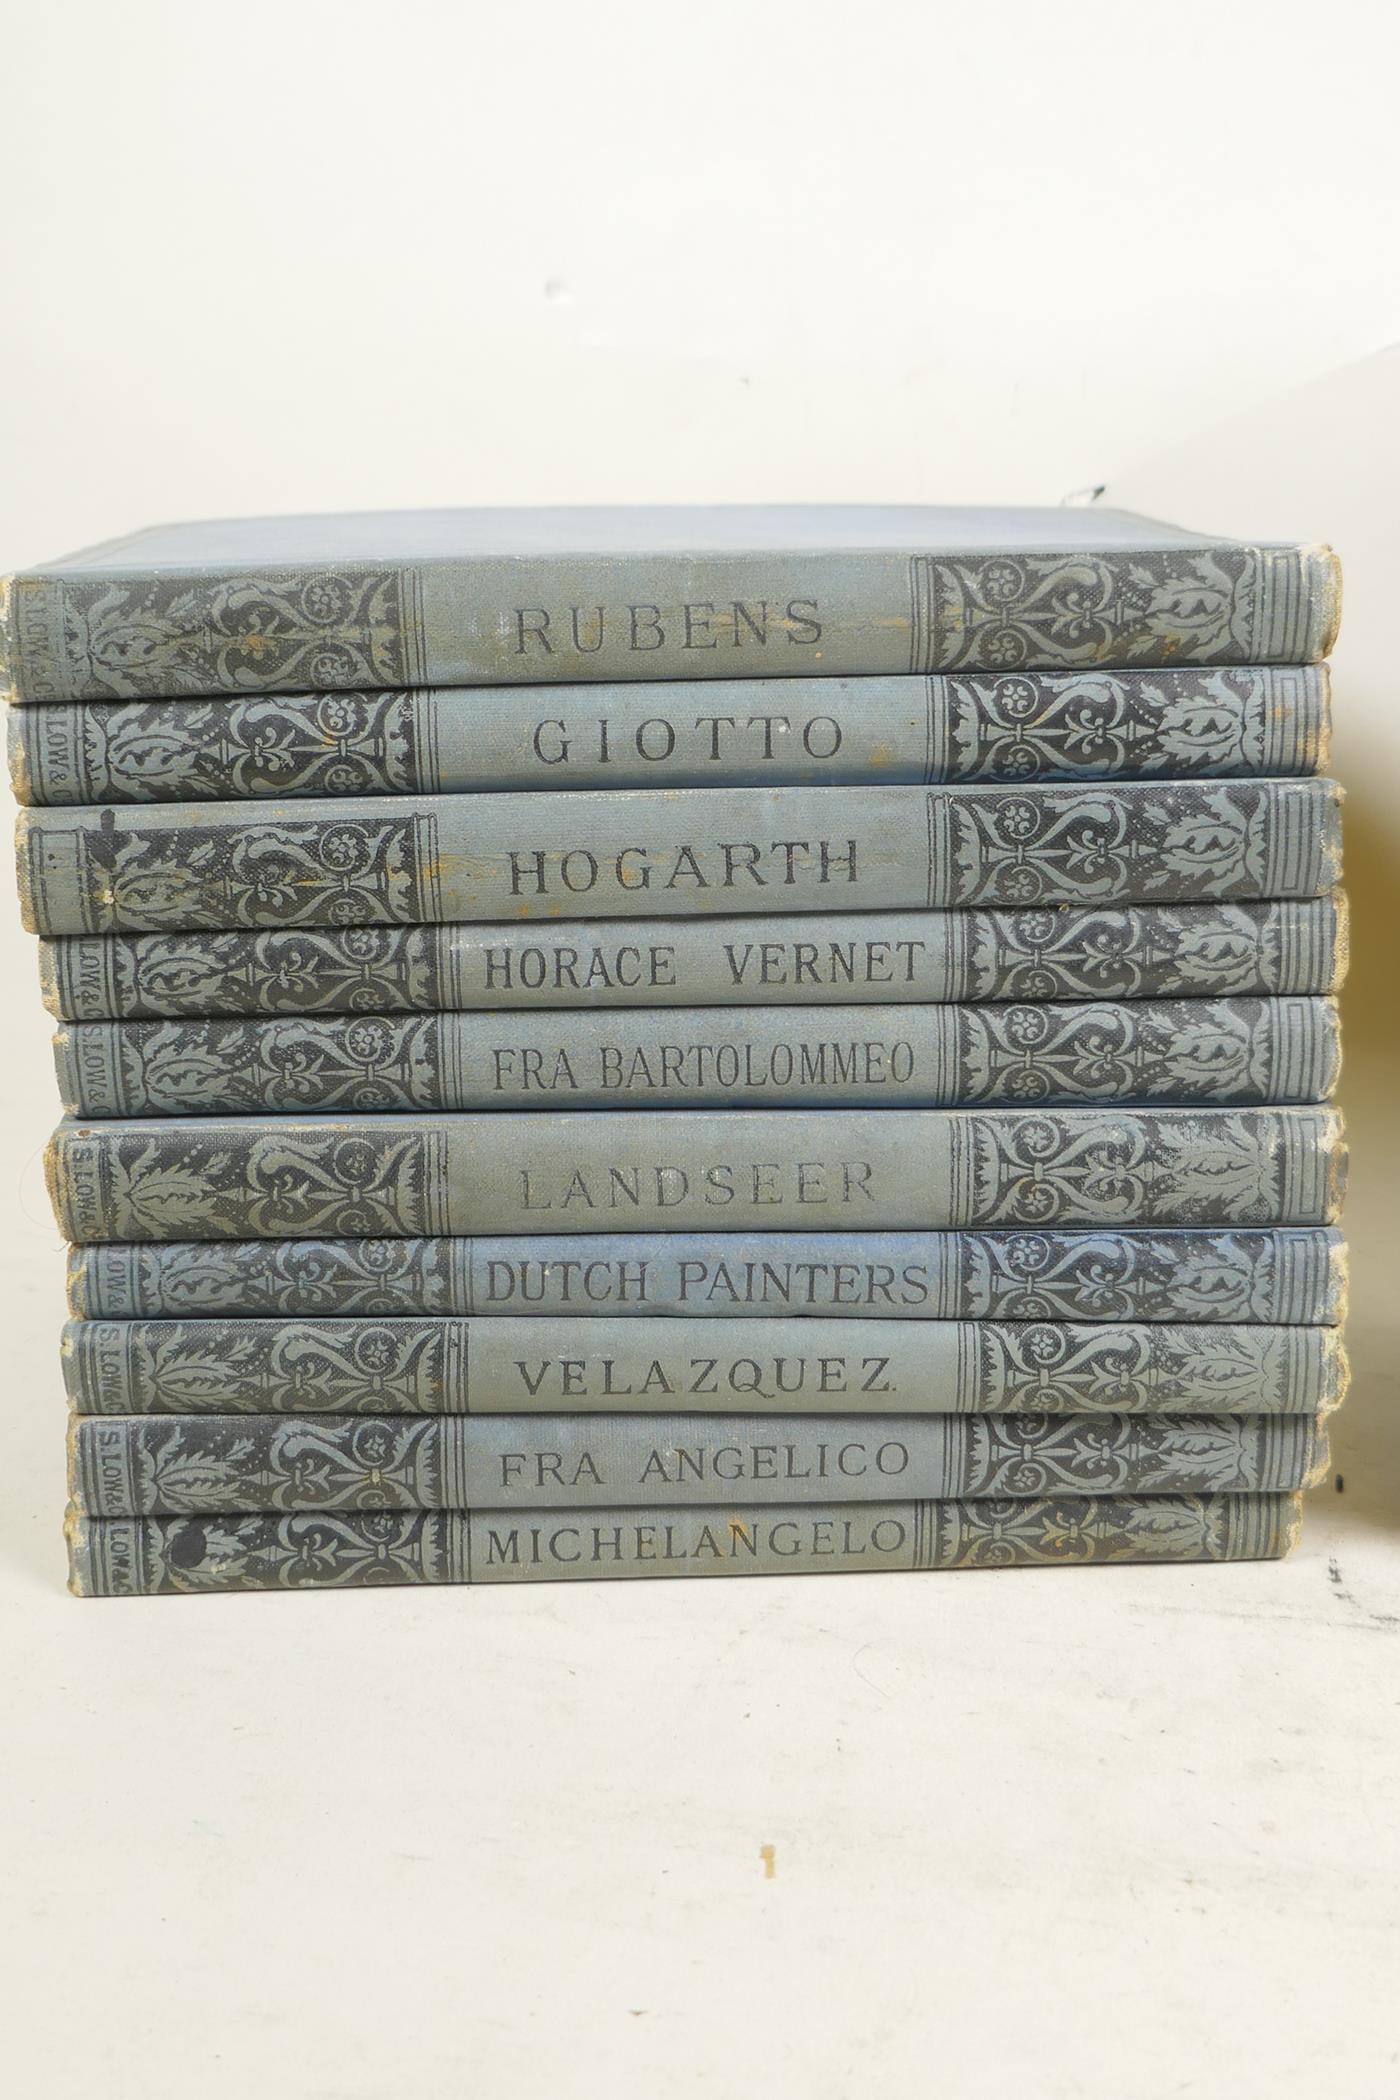 The Works of Charles Dickens, (18 of 20 volumes), printed by Chapman & Hall Ltd, together with ten - Image 2 of 5